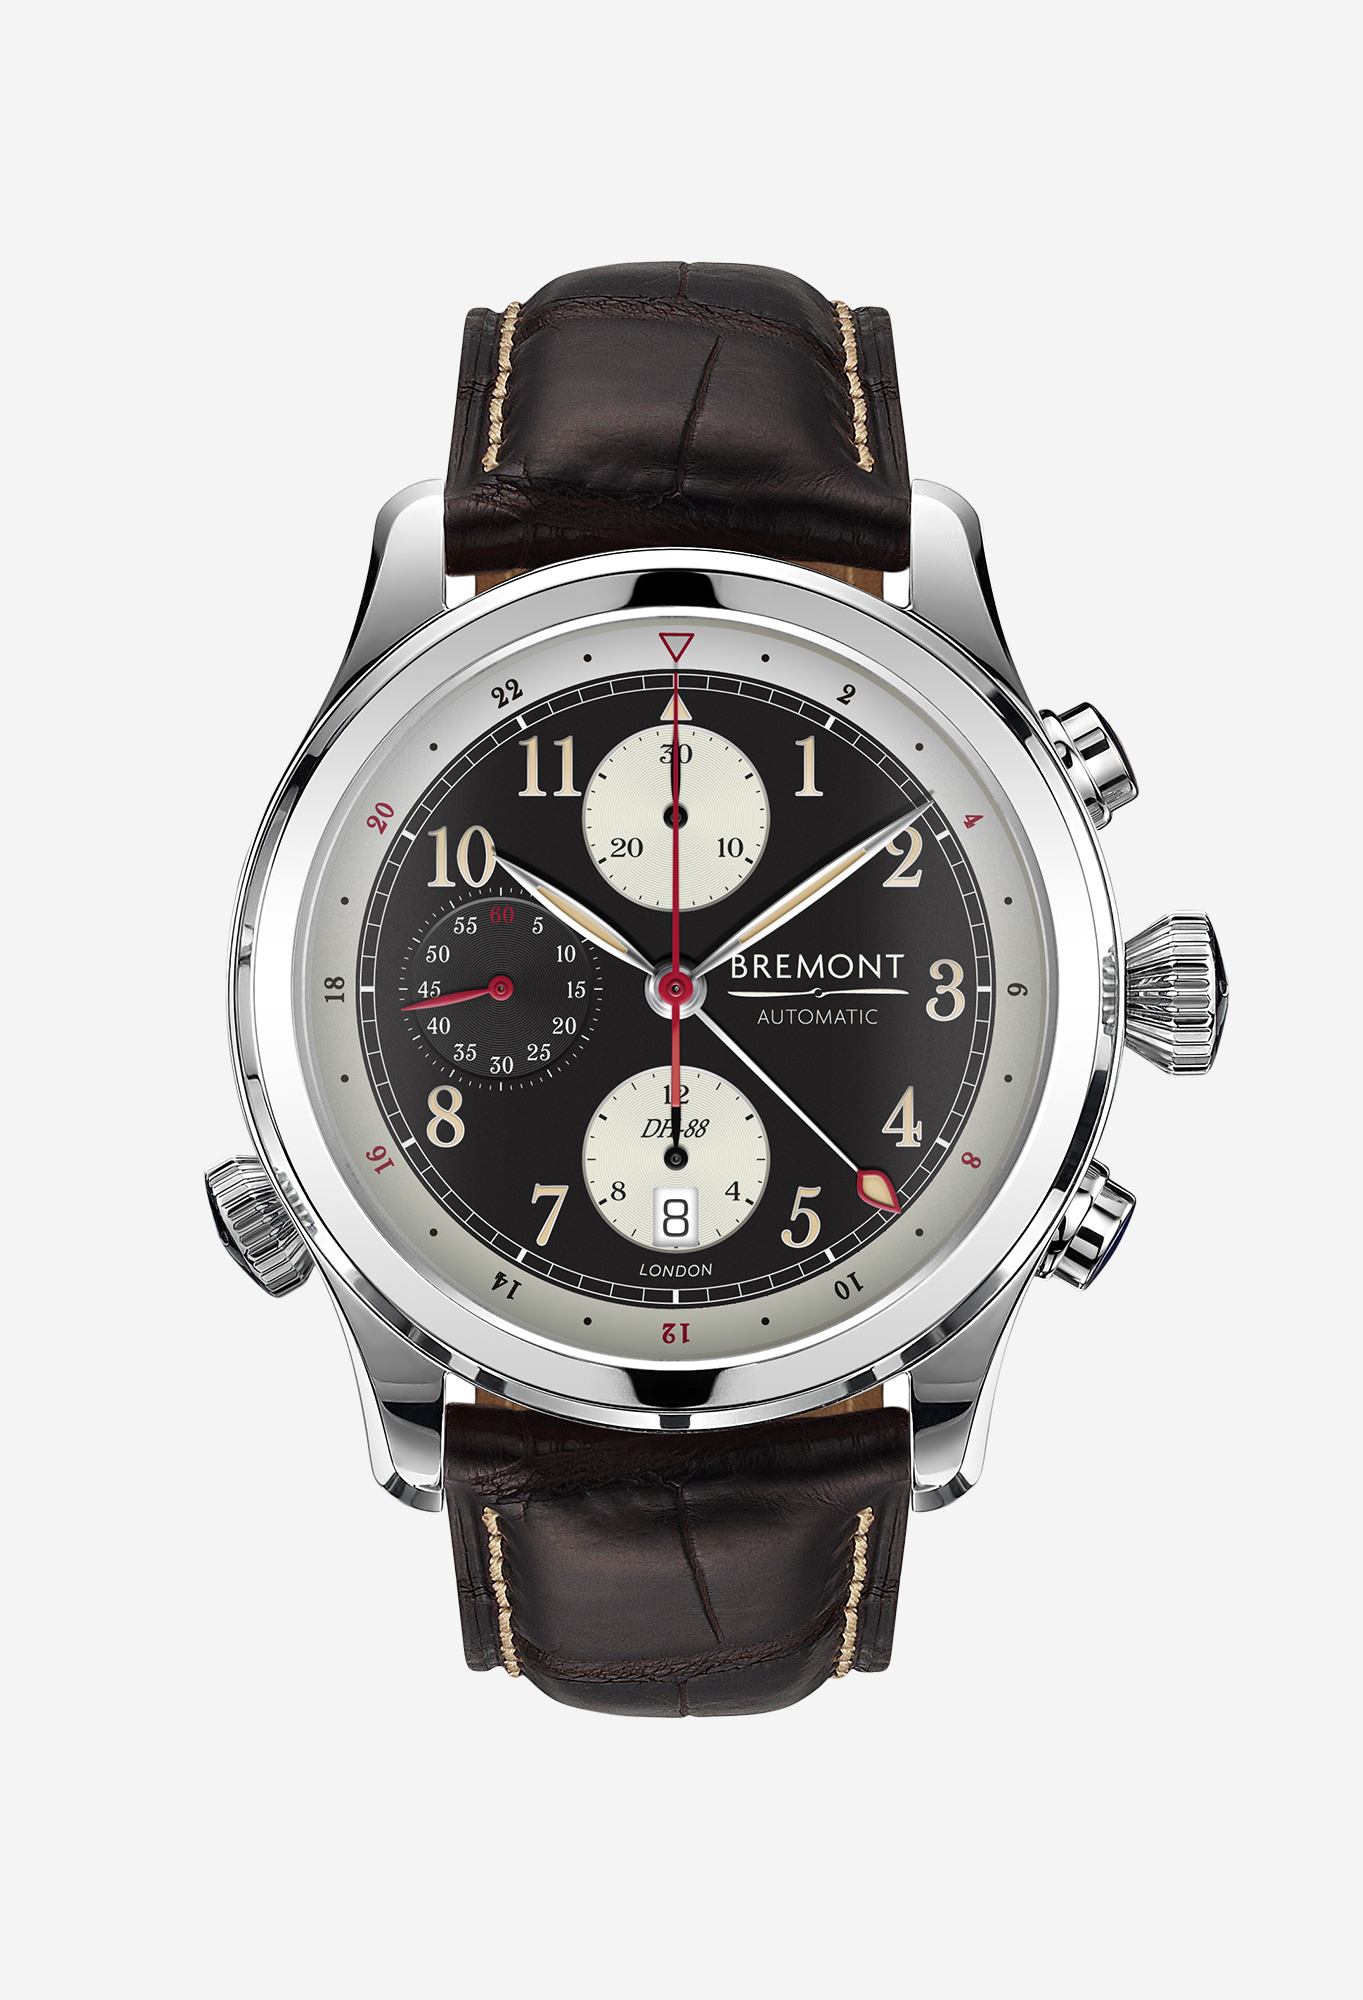 Bremont’s retroaviation inspired DH-88 chronograph aids preservation of vintage planes